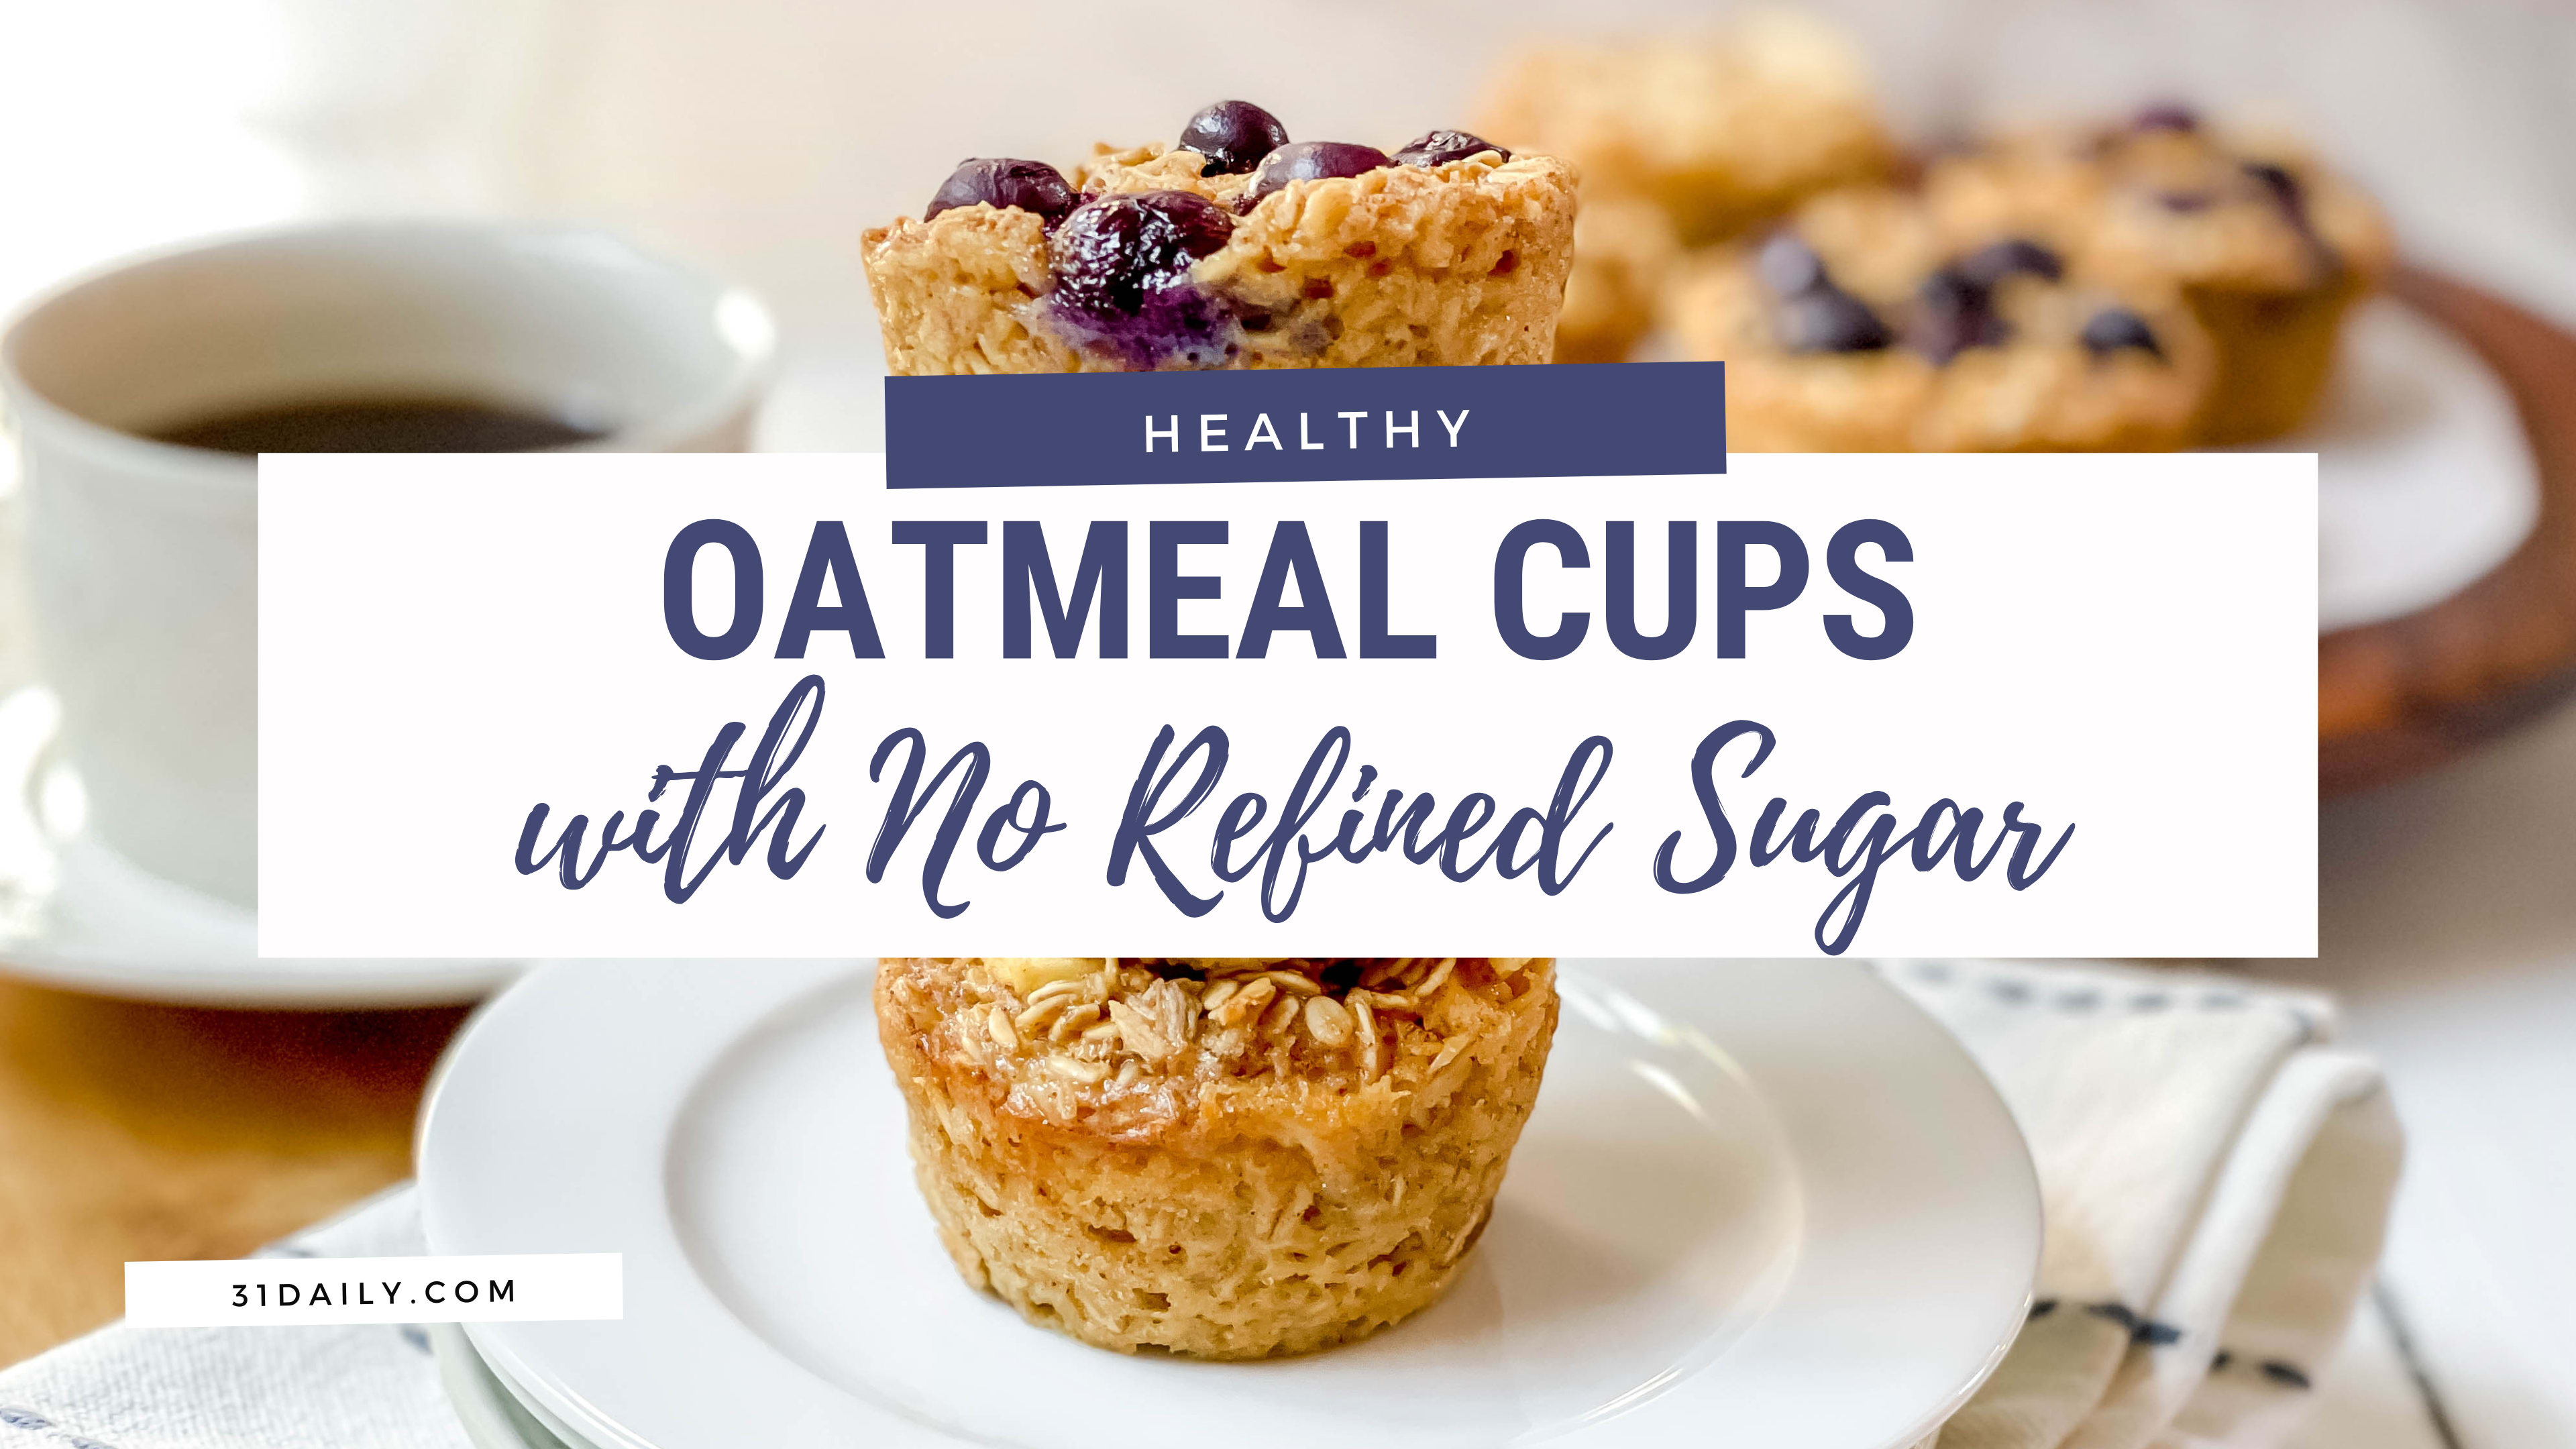 Sugar Free Instant Oatmeal Cups Cookie, Oats in Coats